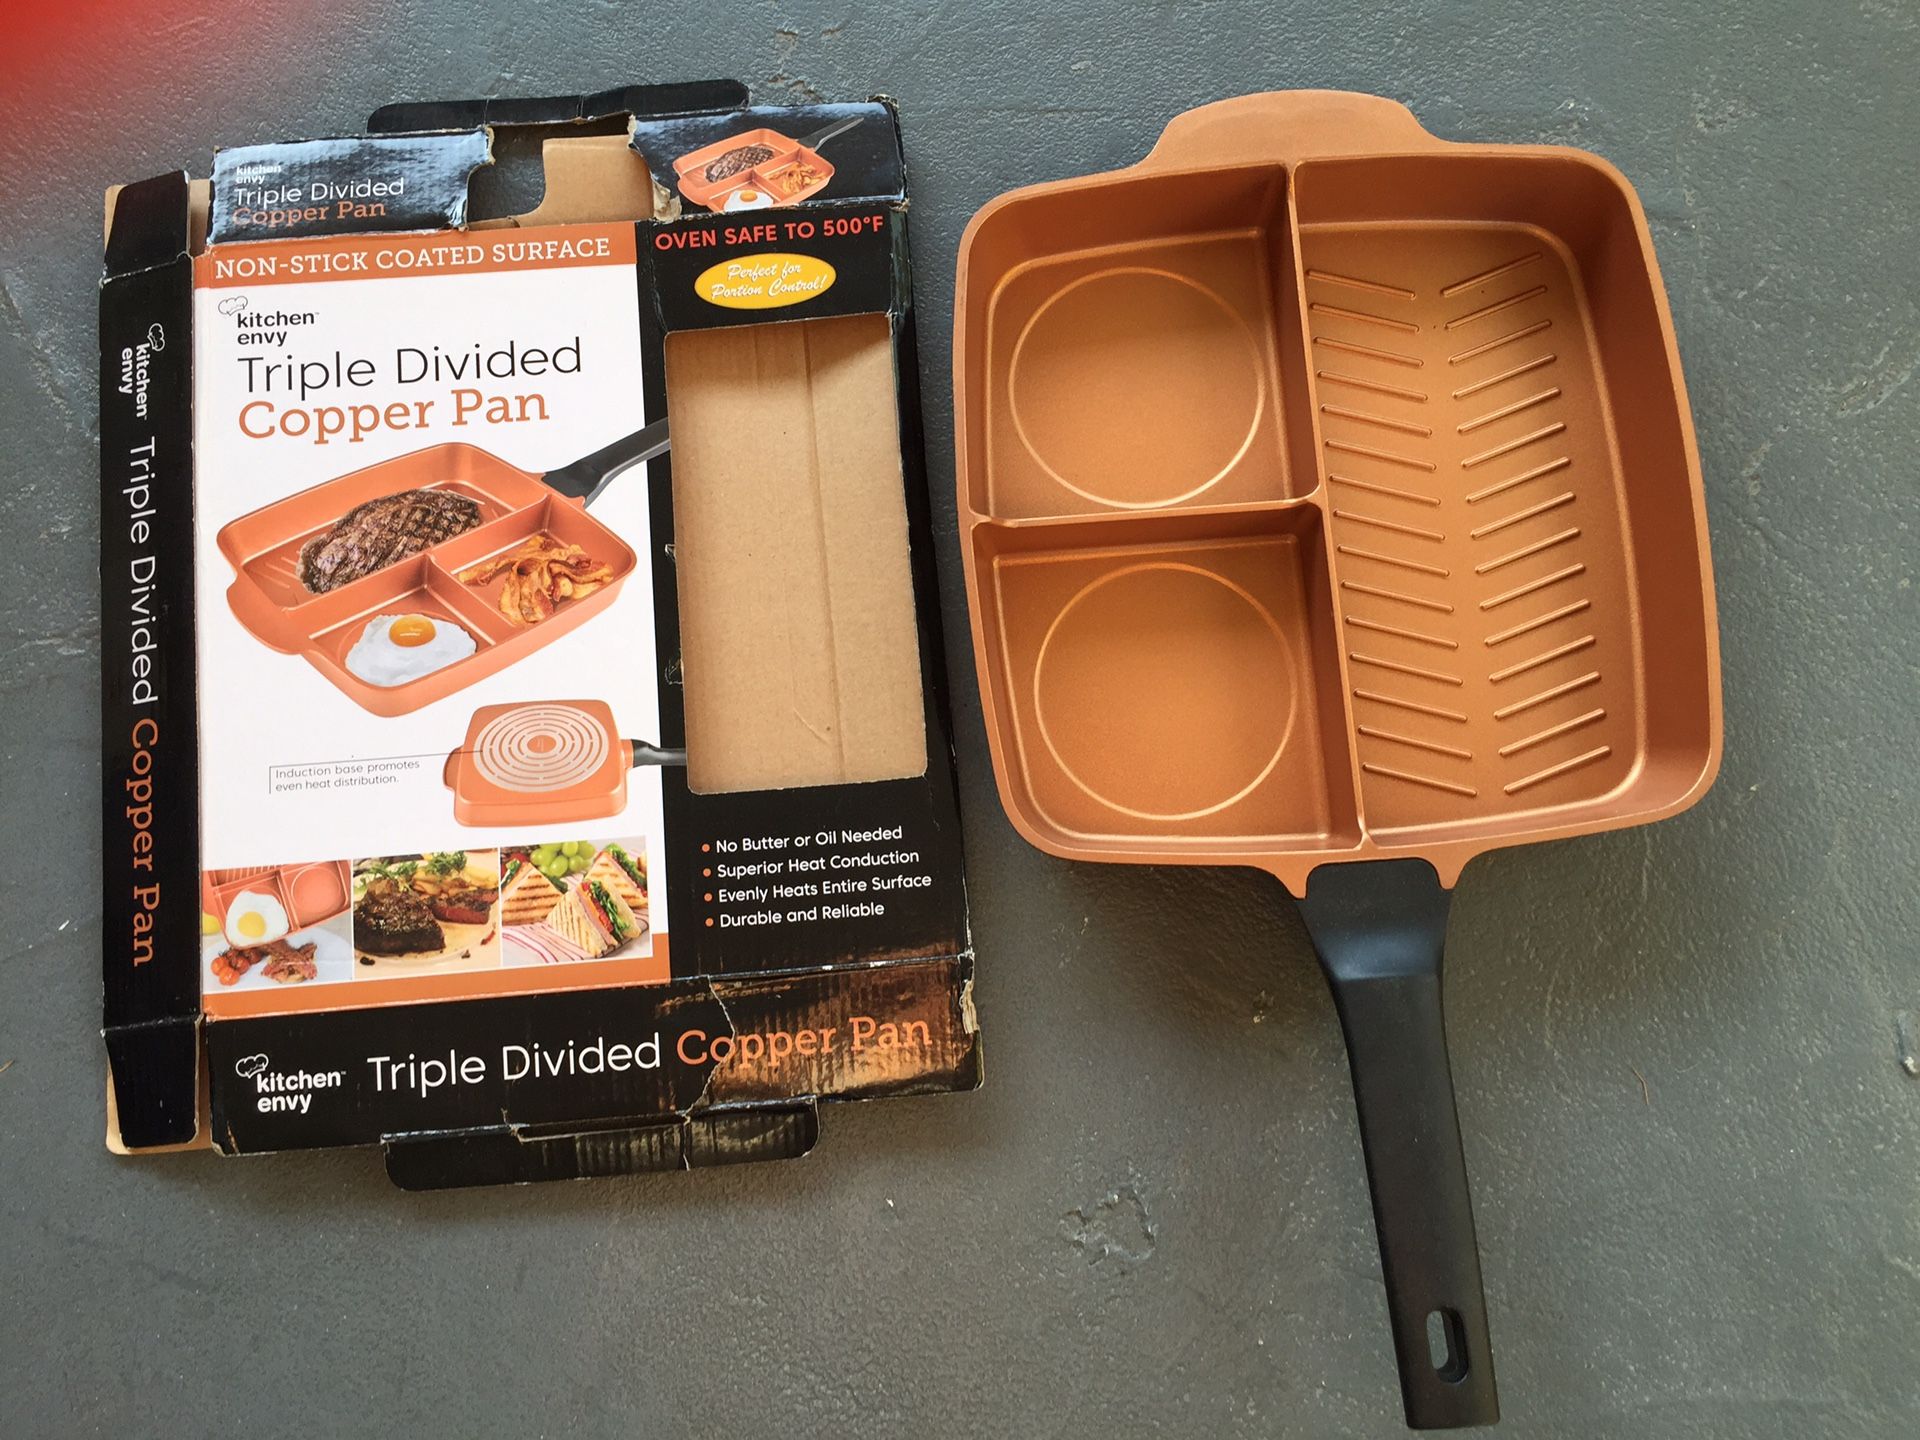 Triple divided copper pan